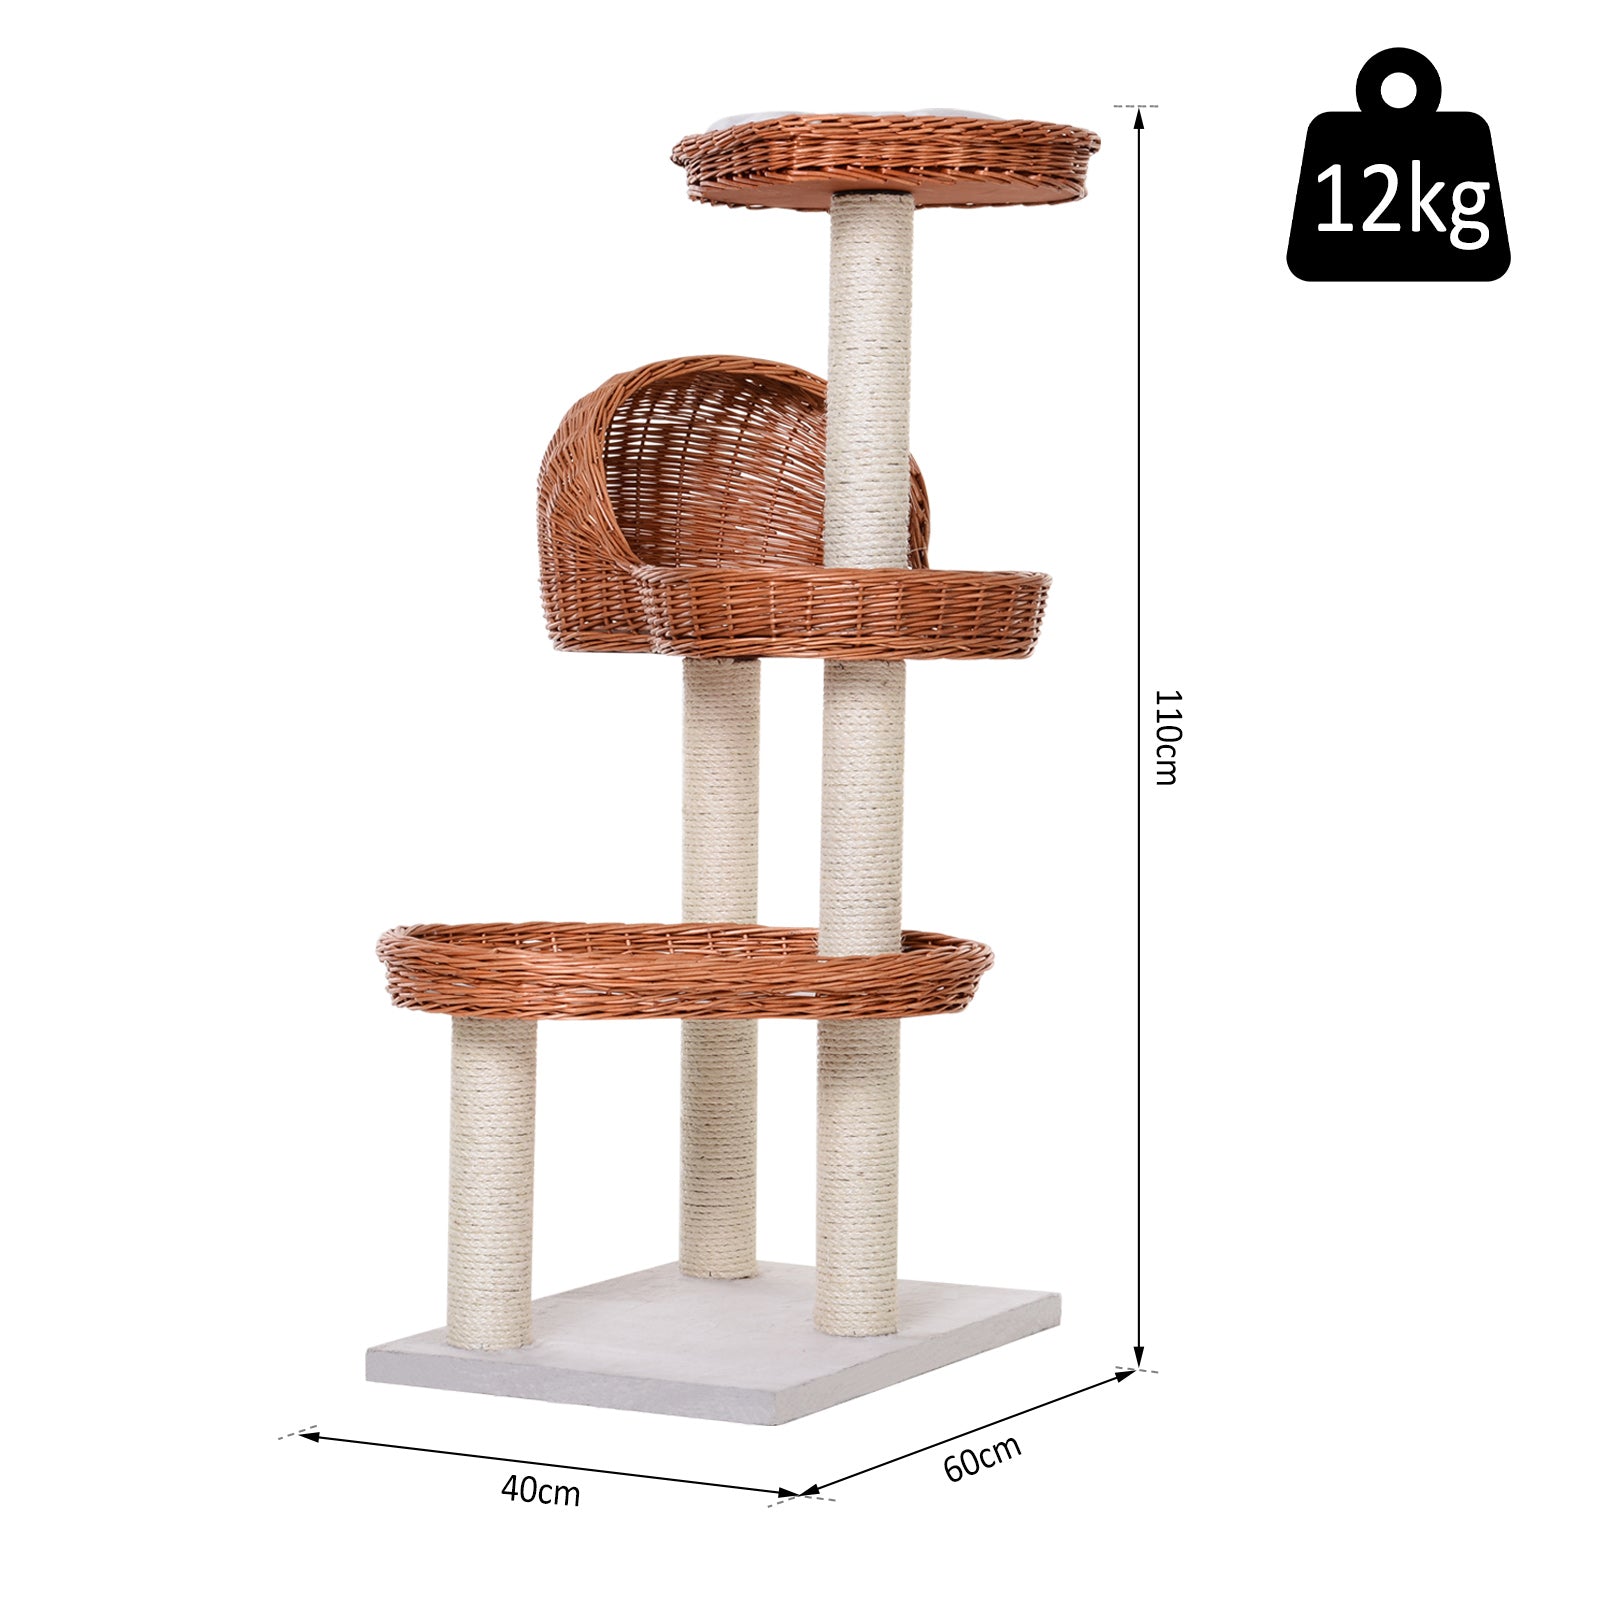 Cats 3-Tier Sisal Rope Scratching Post w/ Wicker Bed Grey